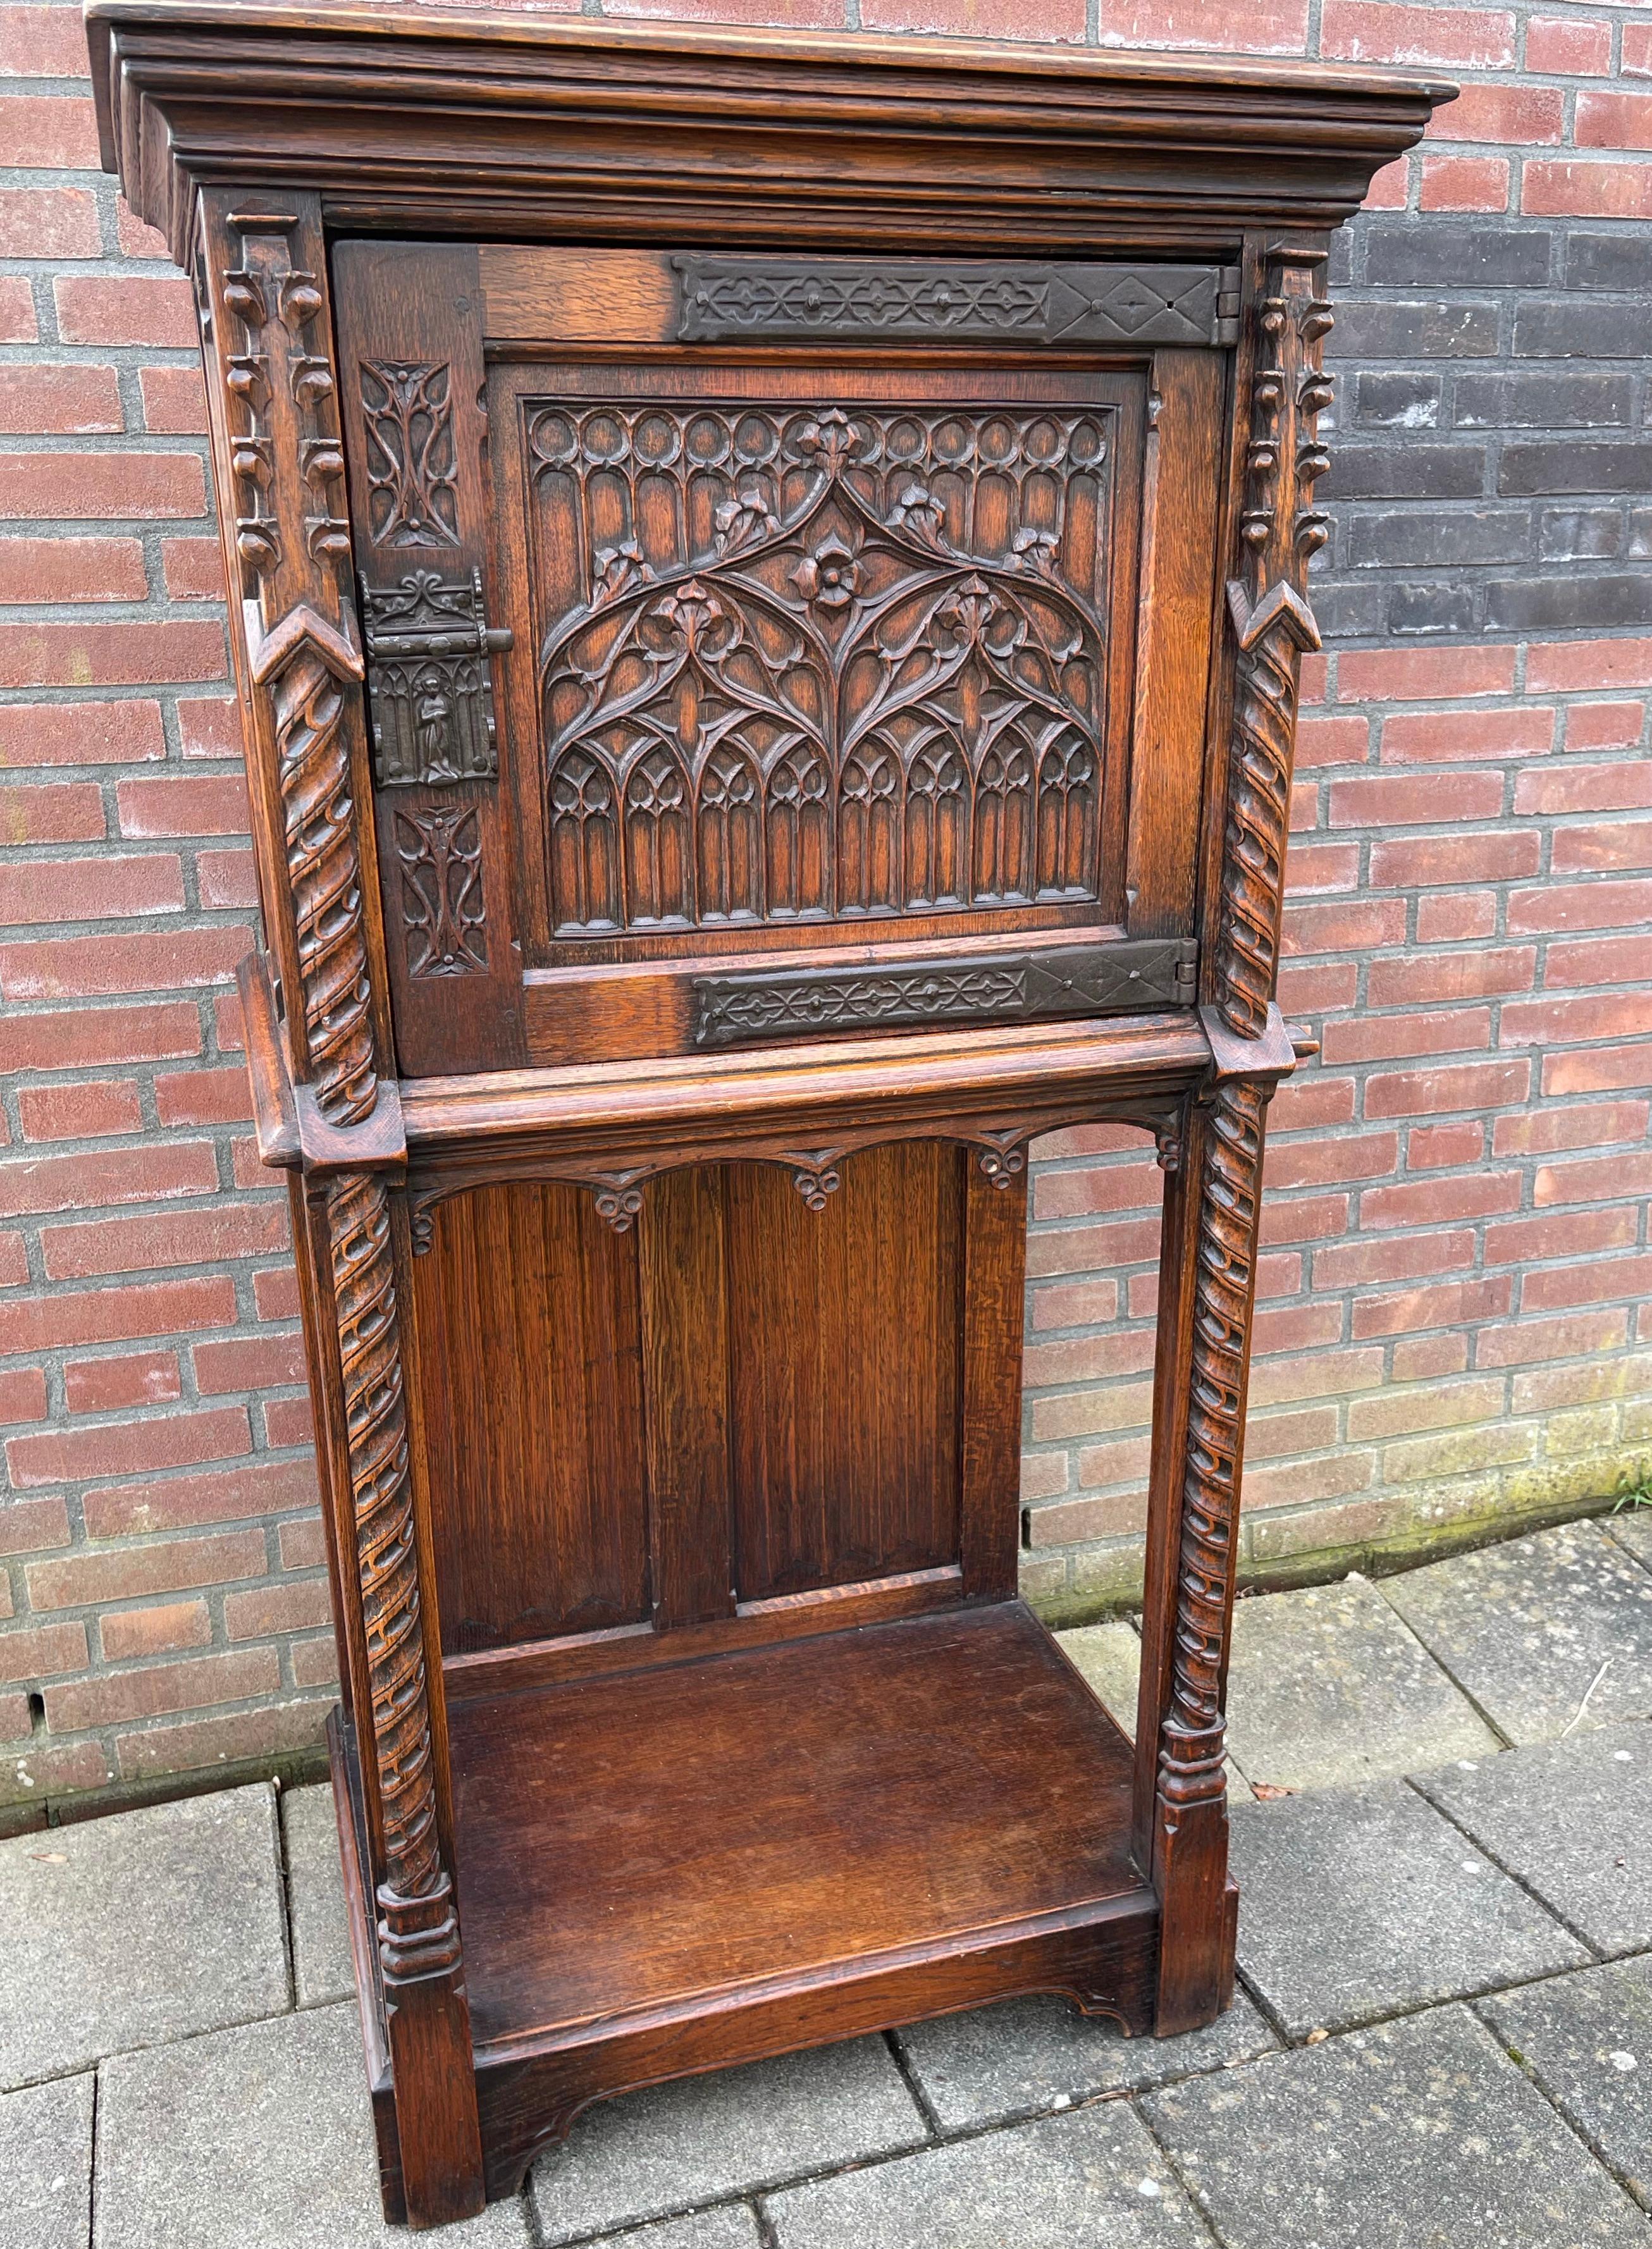 Wonderful craftsmanship and highly practical, Gothic Revival cabinet.

This single door Gothic style cabinet is as stable as the day it was made and apart from some minor imperfections it is in excellent condition as well. Thanks to its practical